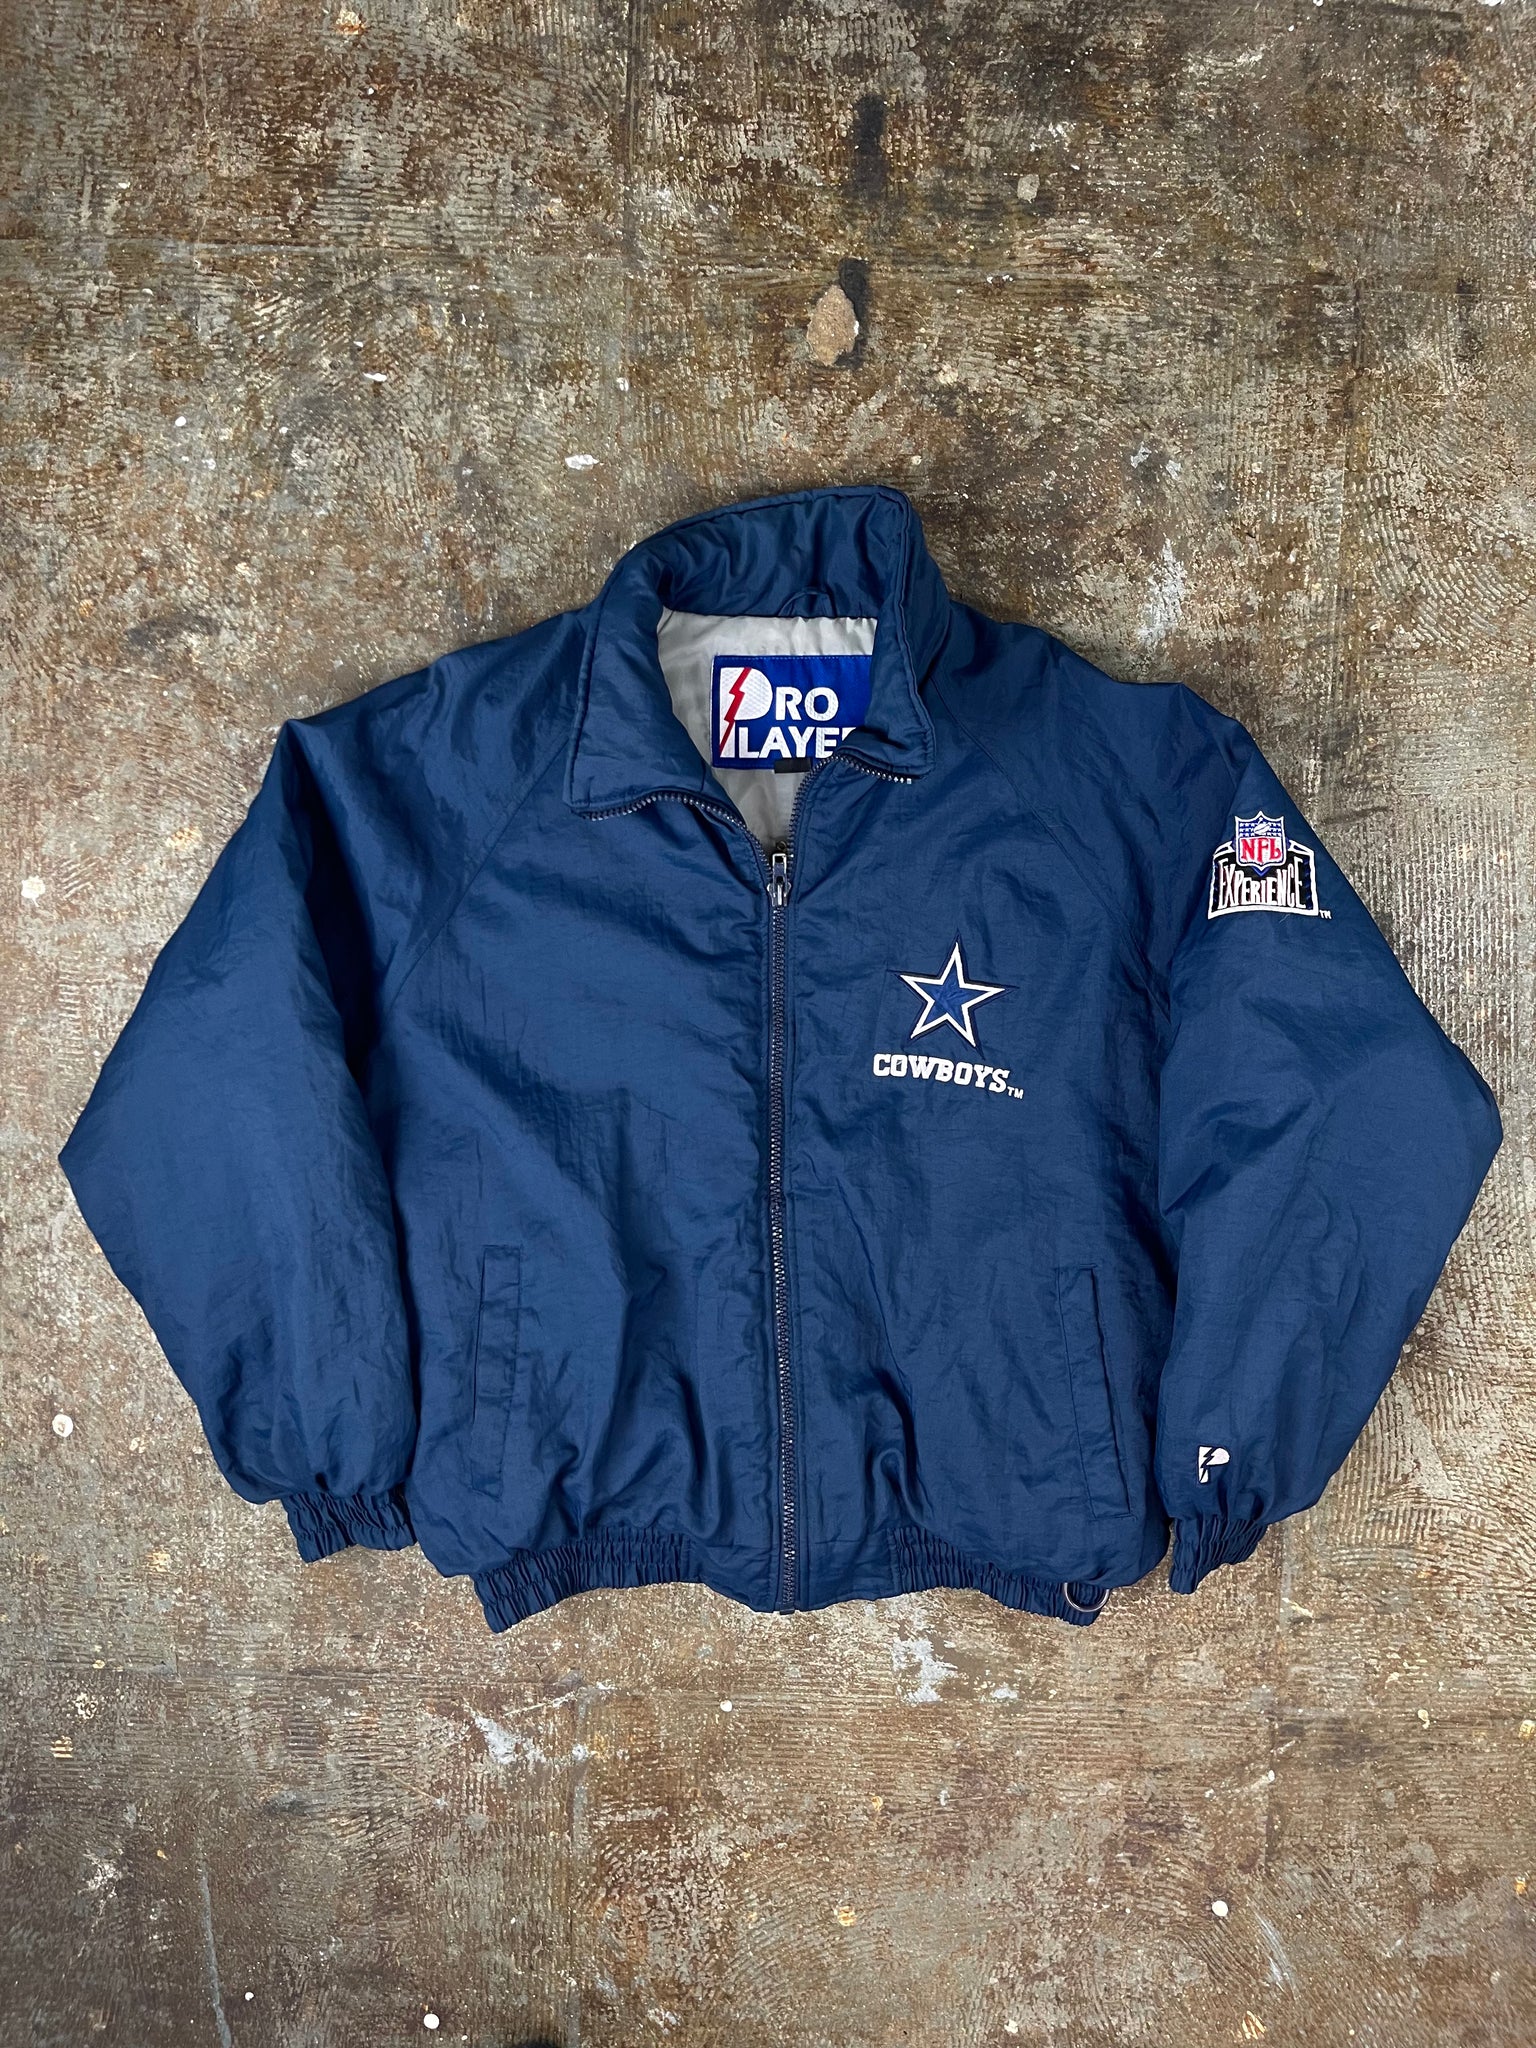 COWBOYS PRO PLAYER PUFFERED JACKET